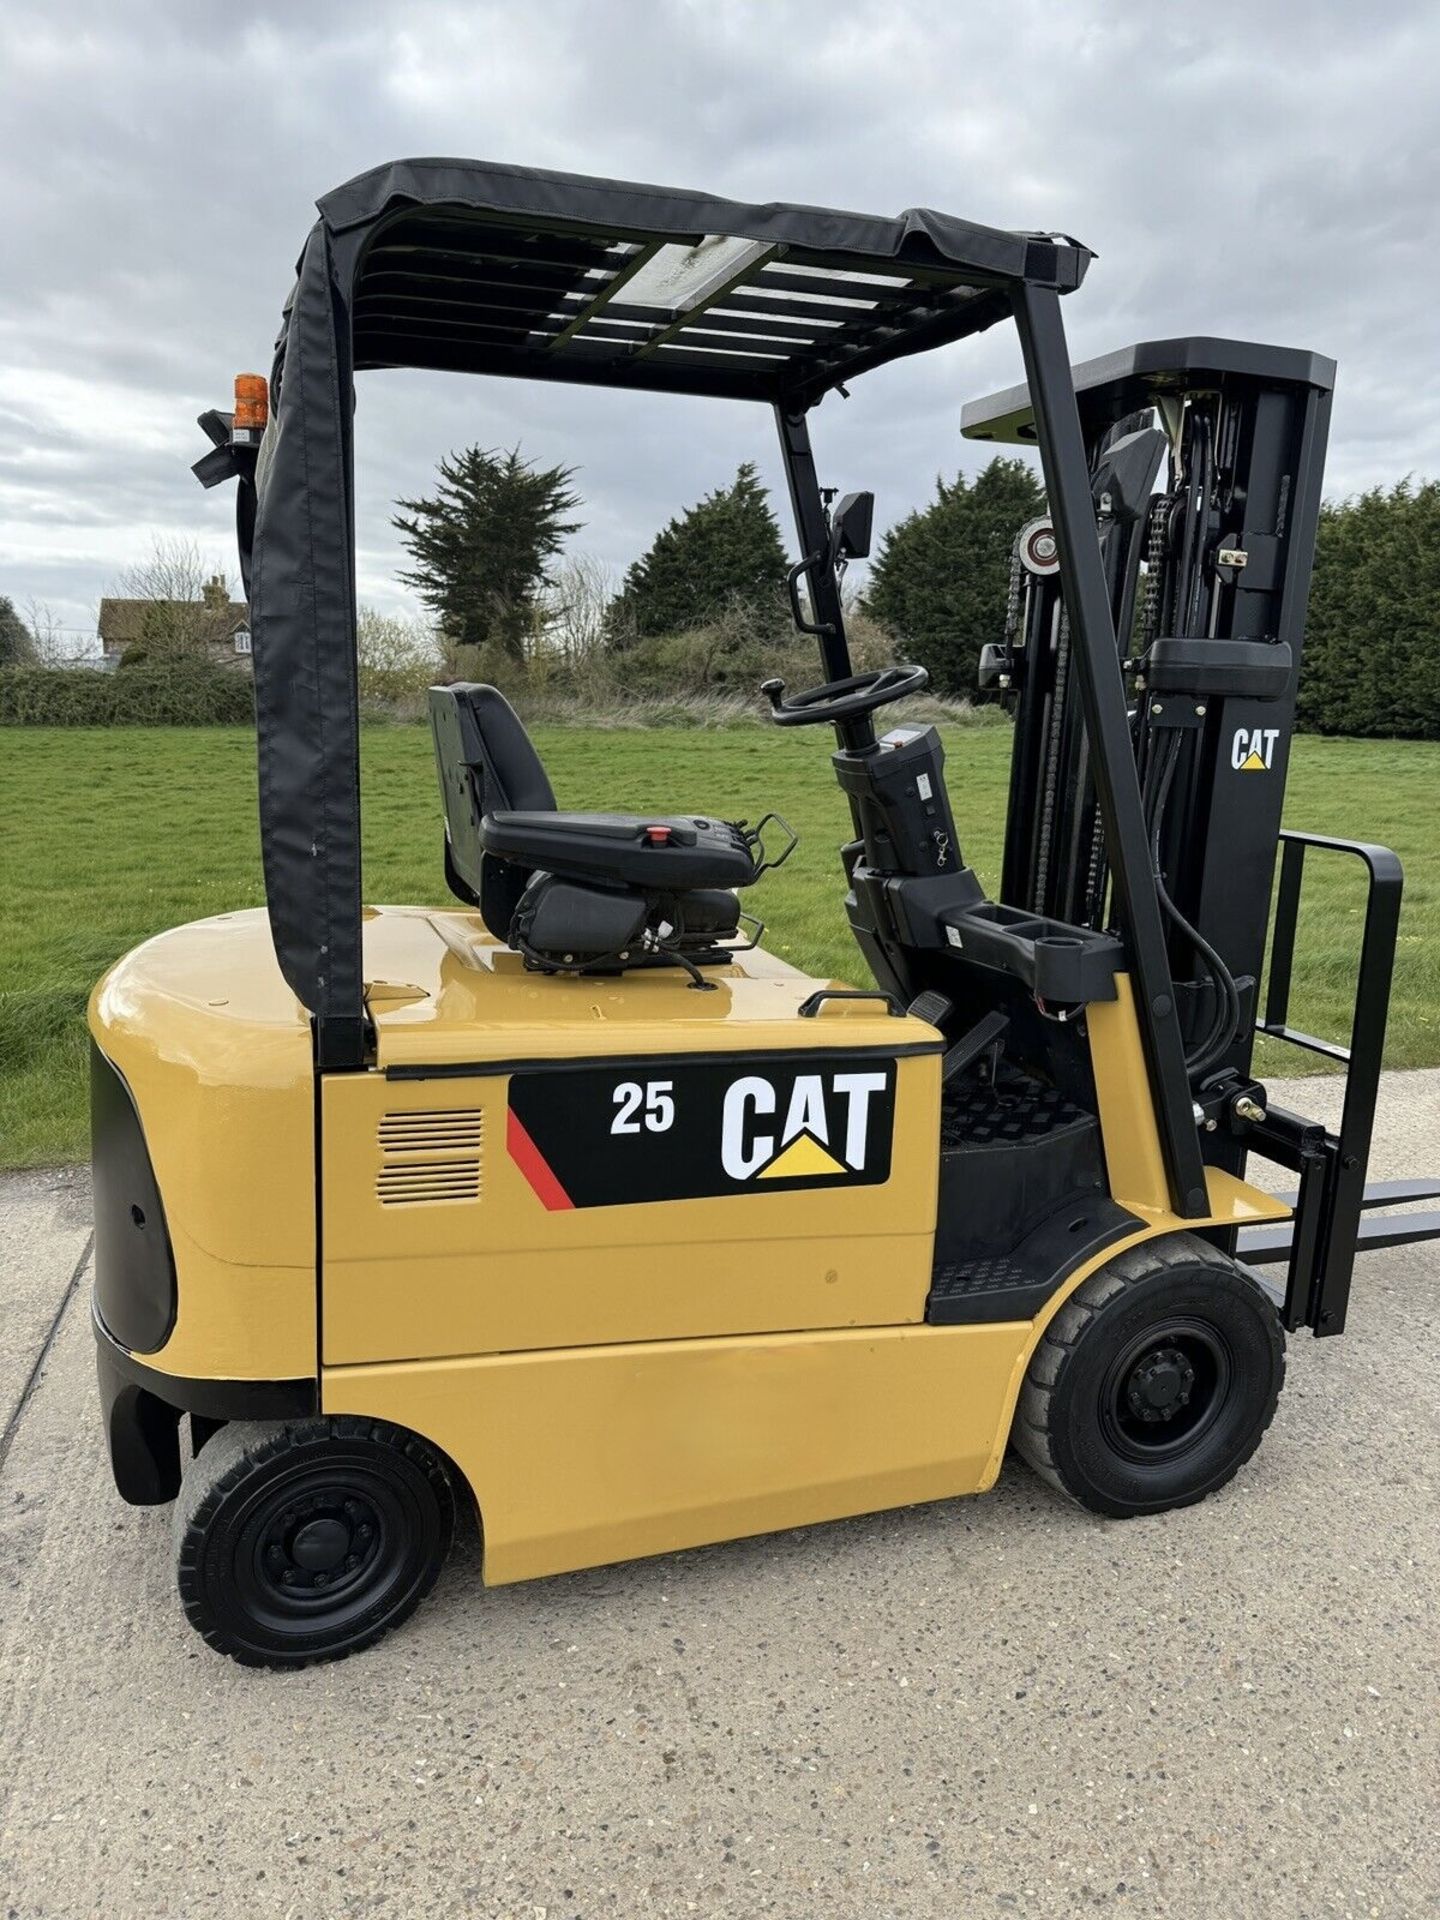 CATERPILLAR - 2.5 Tonne Electric Forklift Truck (Container Spec) - Image 2 of 7